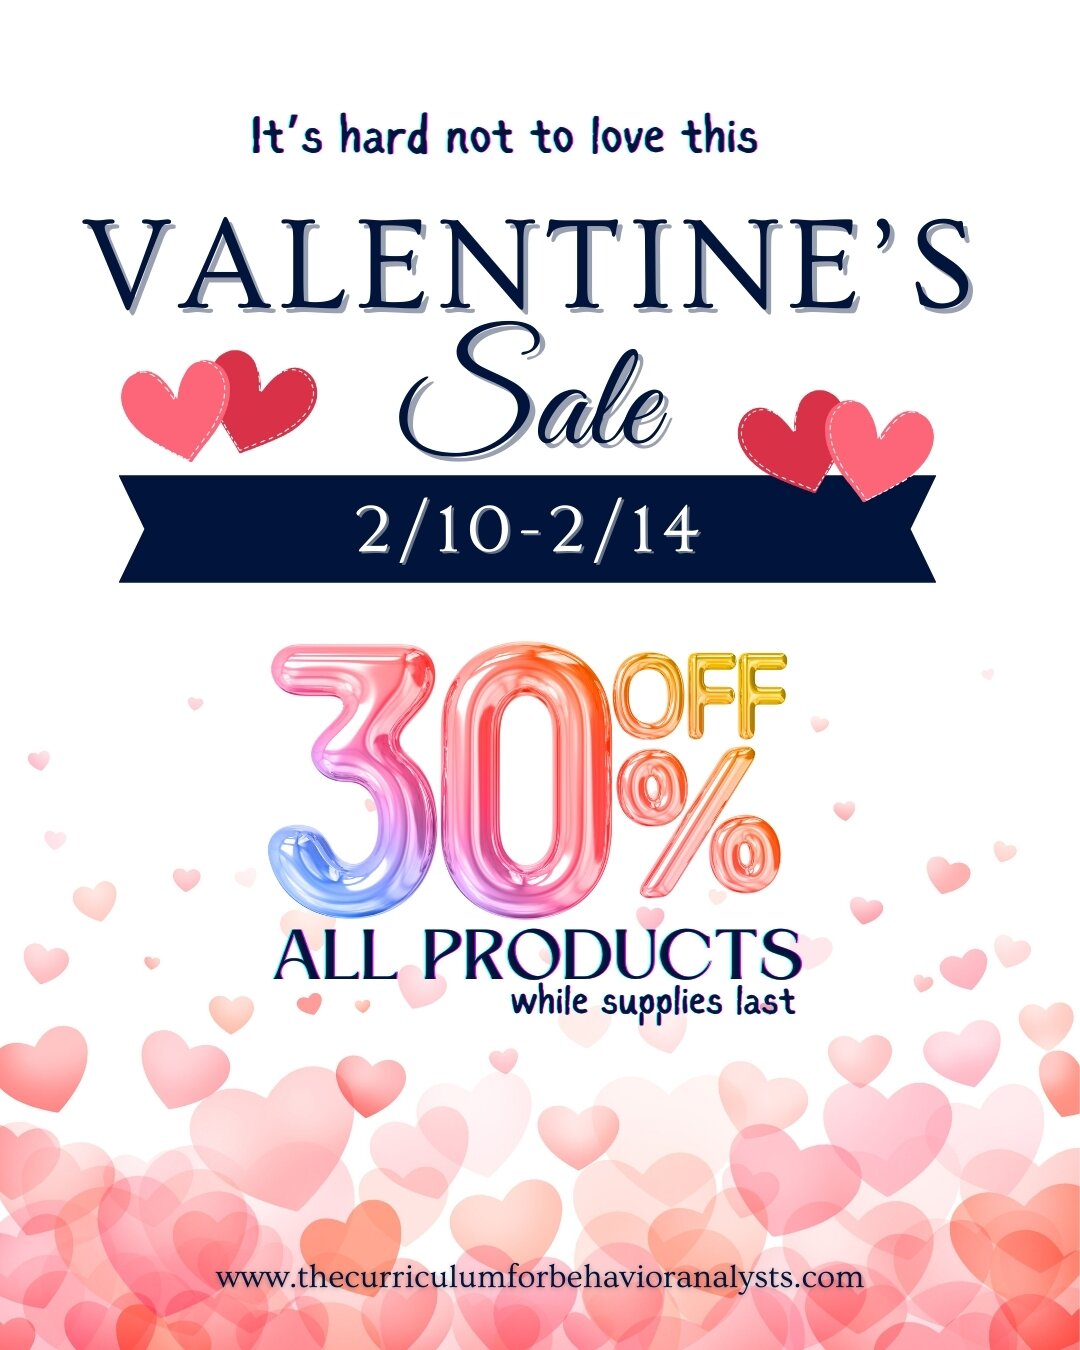 Get the ABA professional you 💕 the Valentine's gift of a lifetime during our Valentines Sale! 30 % off all products 2/10-2/14! 💝

 #BCBA #bcbasupervision #bcbasupervisor #remotesupervision #bcbaexam #bcbaexamprep #AppliedBehaviorAnalysis #BoardCert